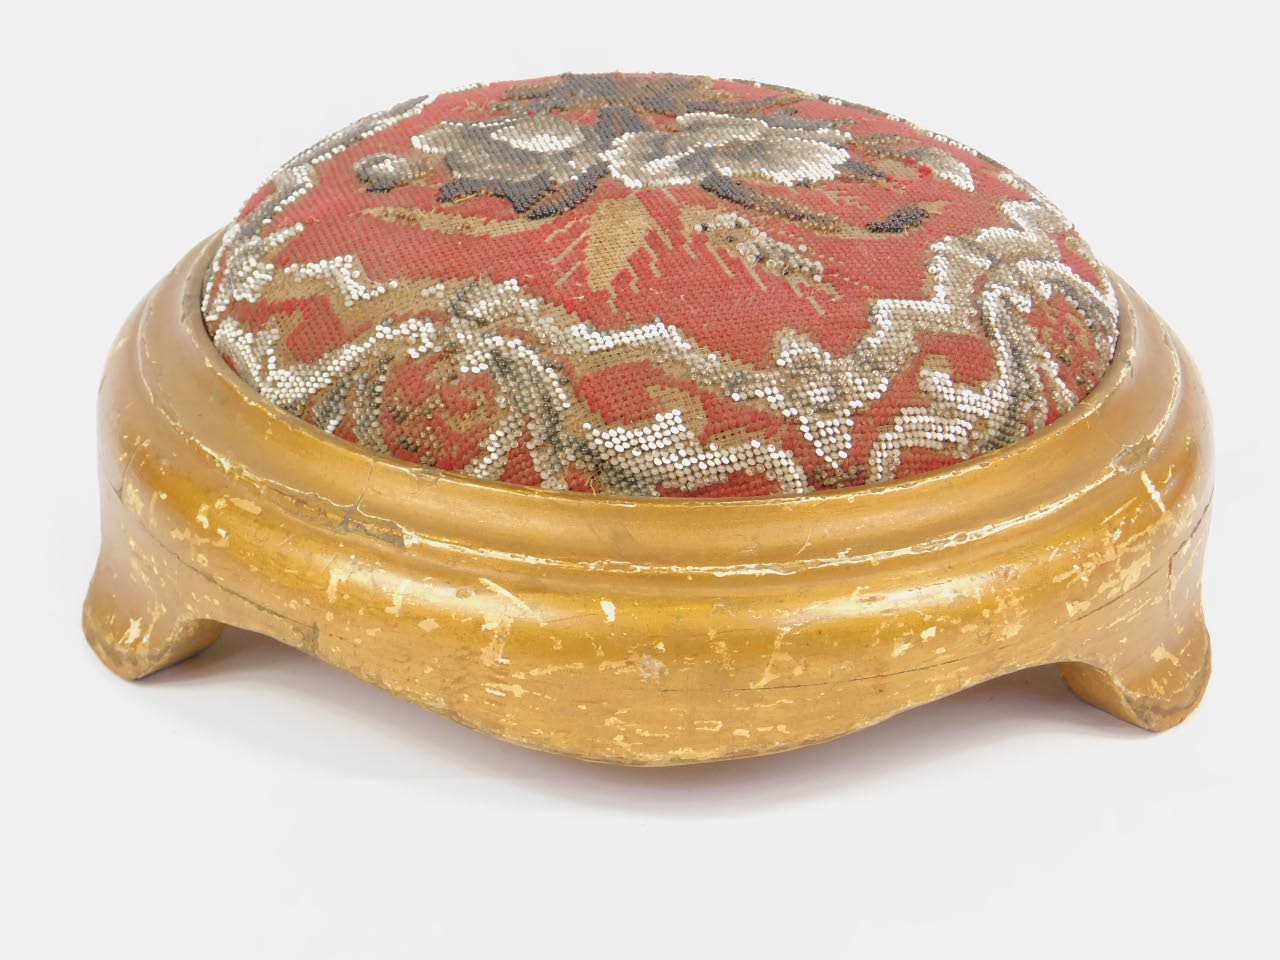 A Victorian giltwood foot stool, with a floral decorated wool and bead work upholstery, 32.5cm